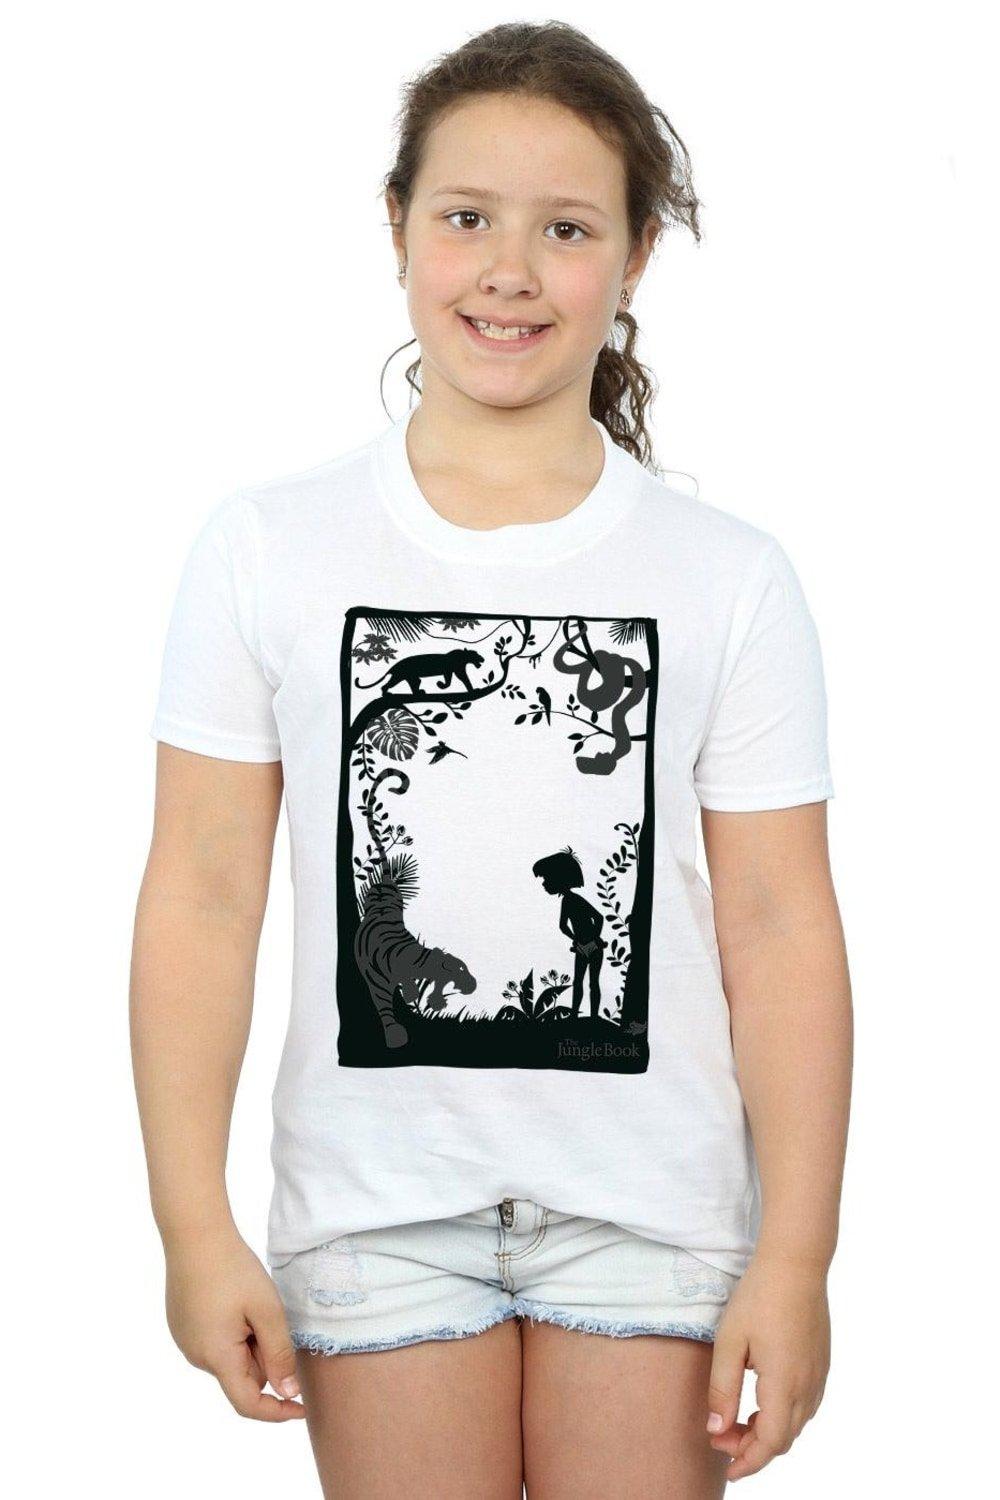 The Jungle Book Silhouette Poster Cotton T-Shirt